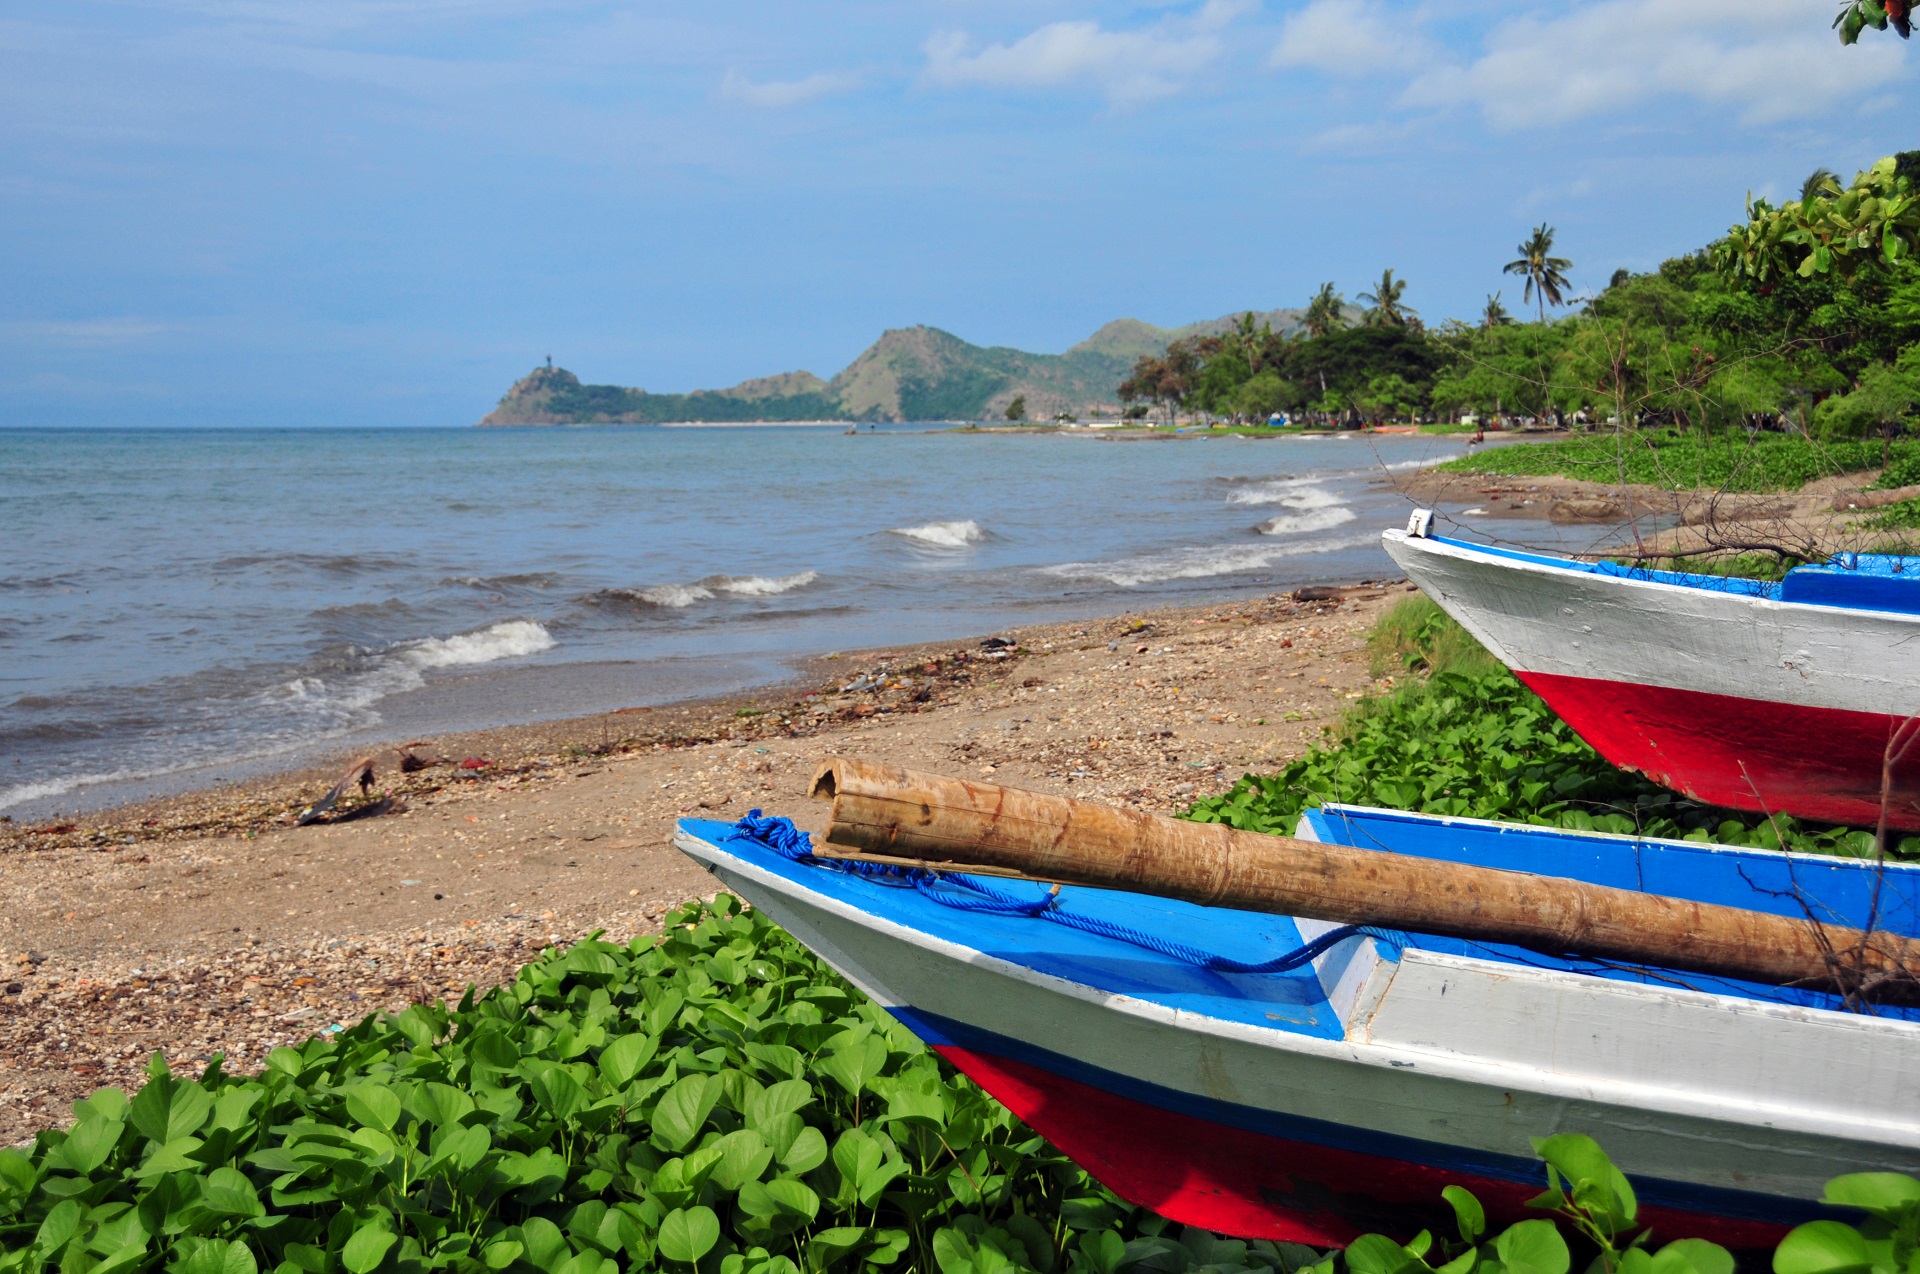 Dili, East Timor / Timor Leste: downtown beach with fishing boats